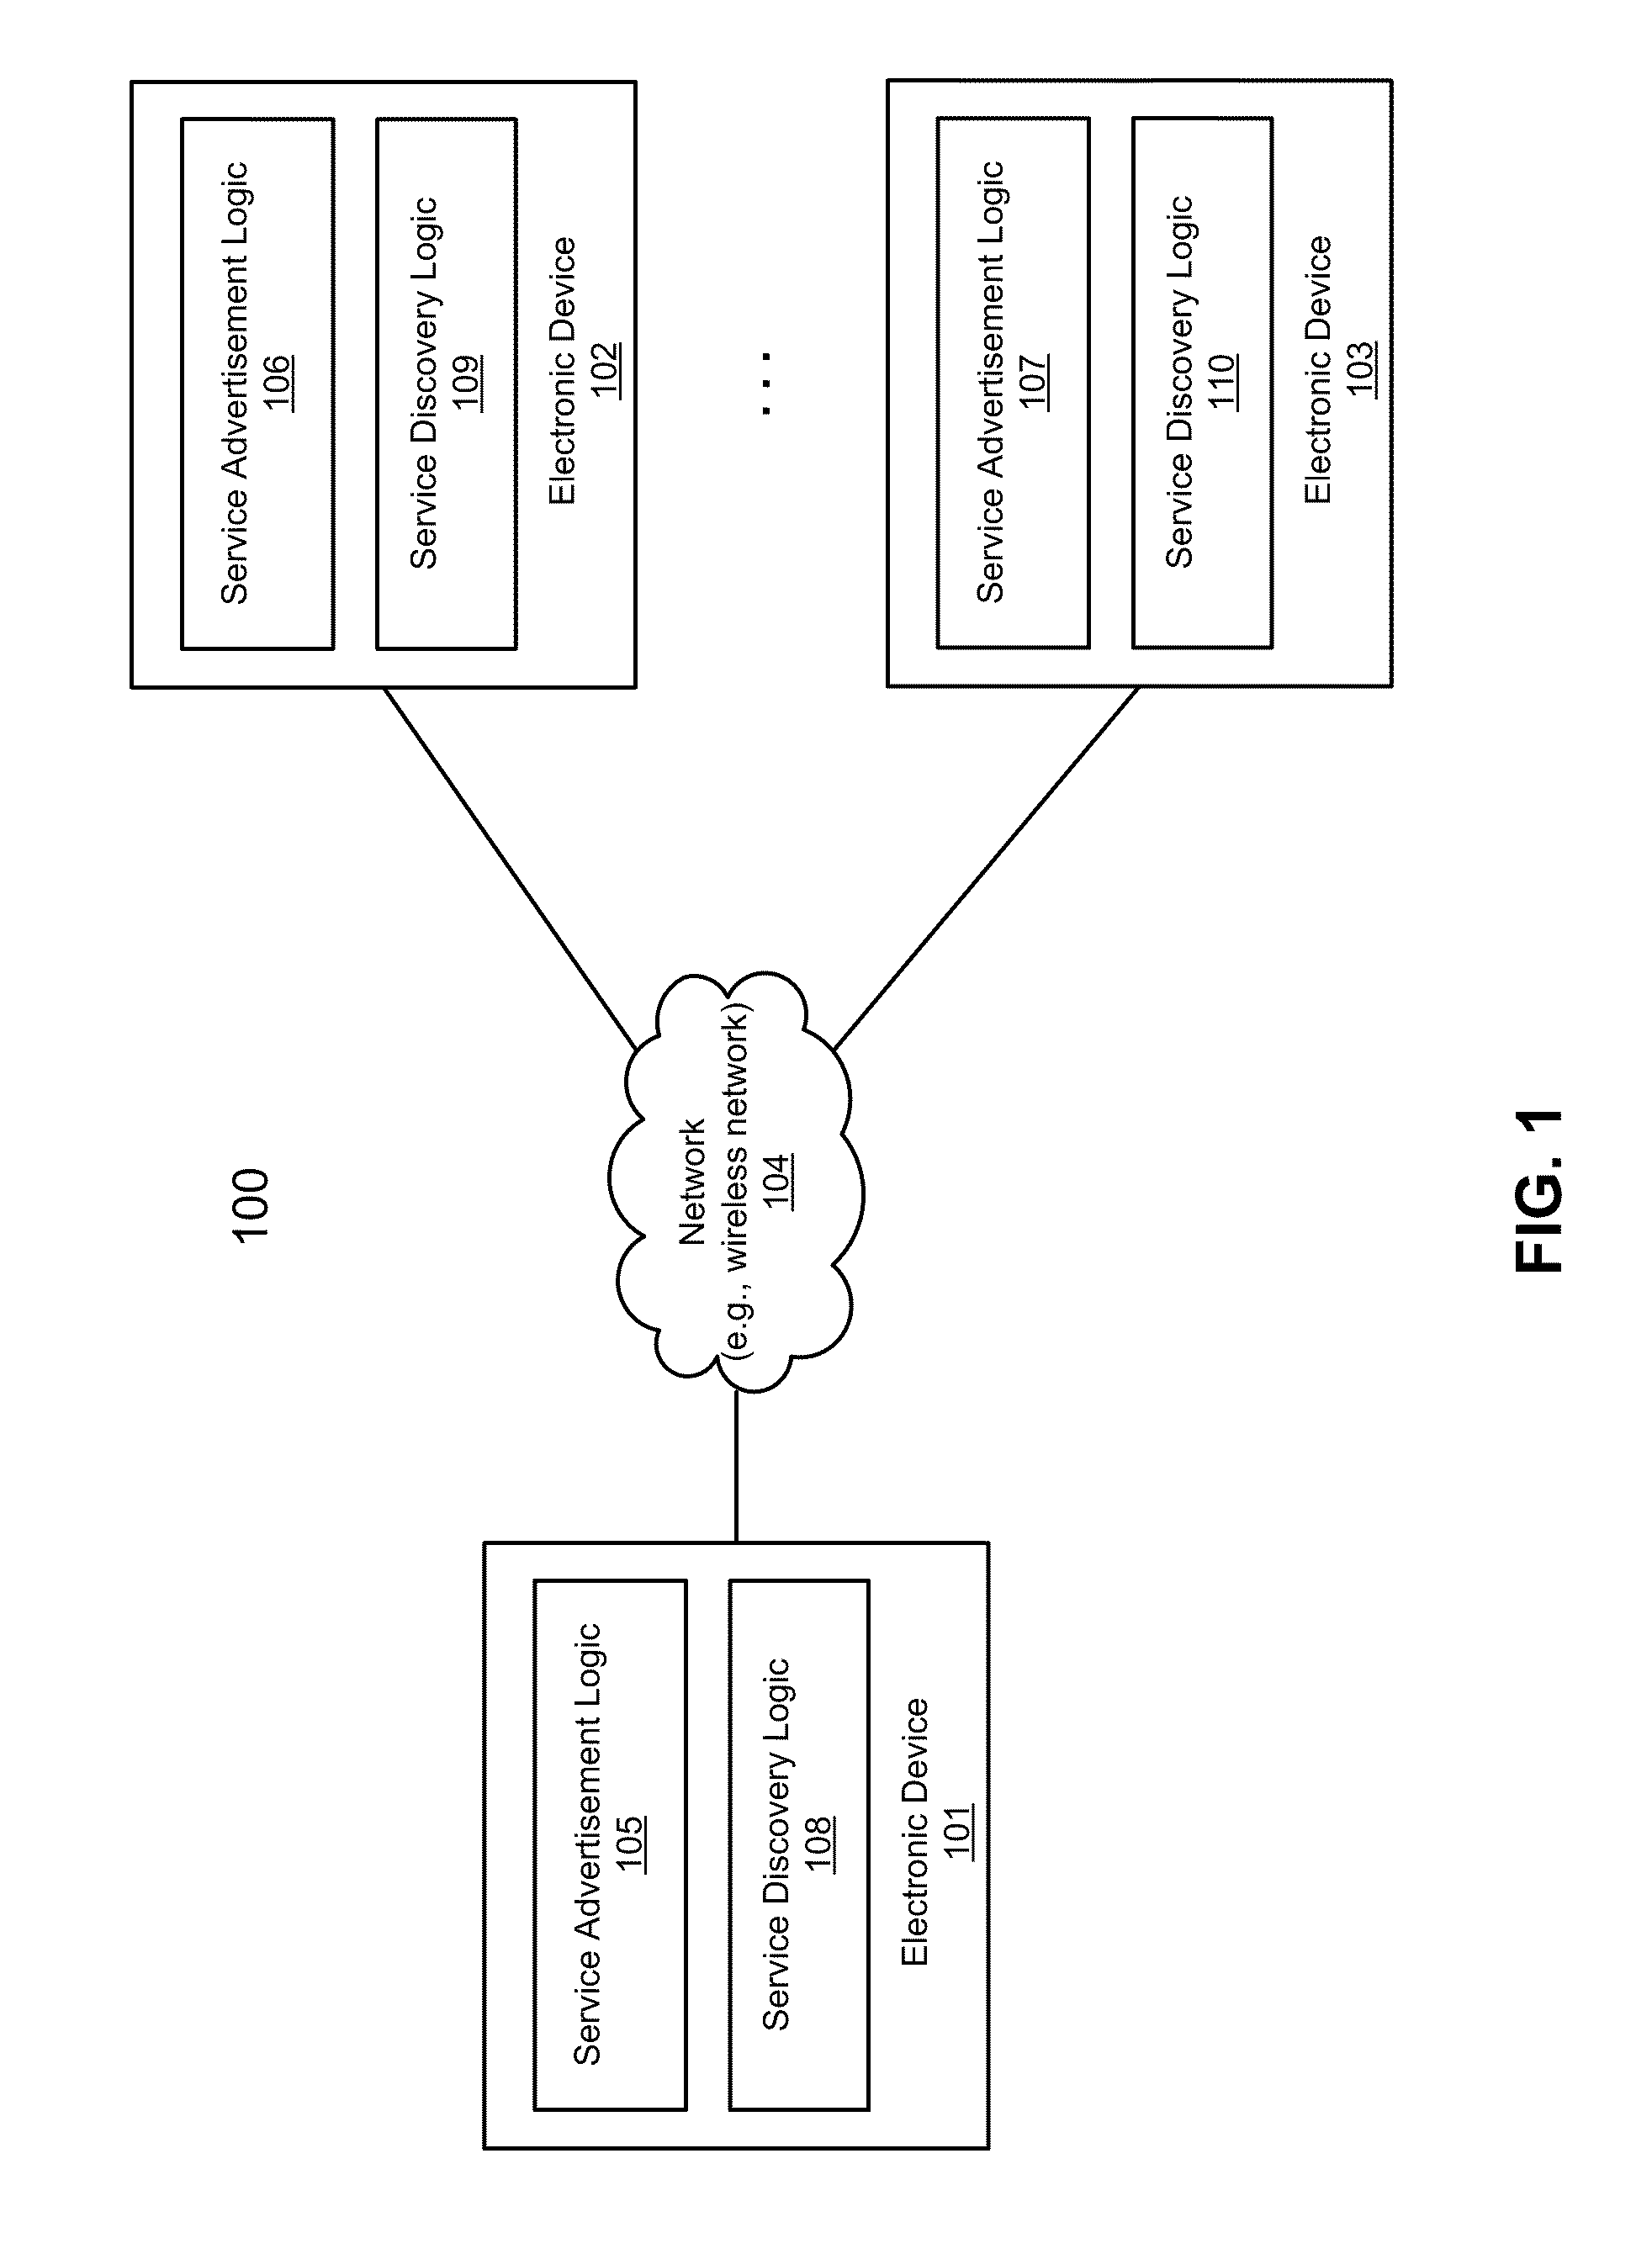 Efficient service advertisement and discovery in a peer-to-peer networking environment with dynamic advertisement and discovery periods based on operating conditions